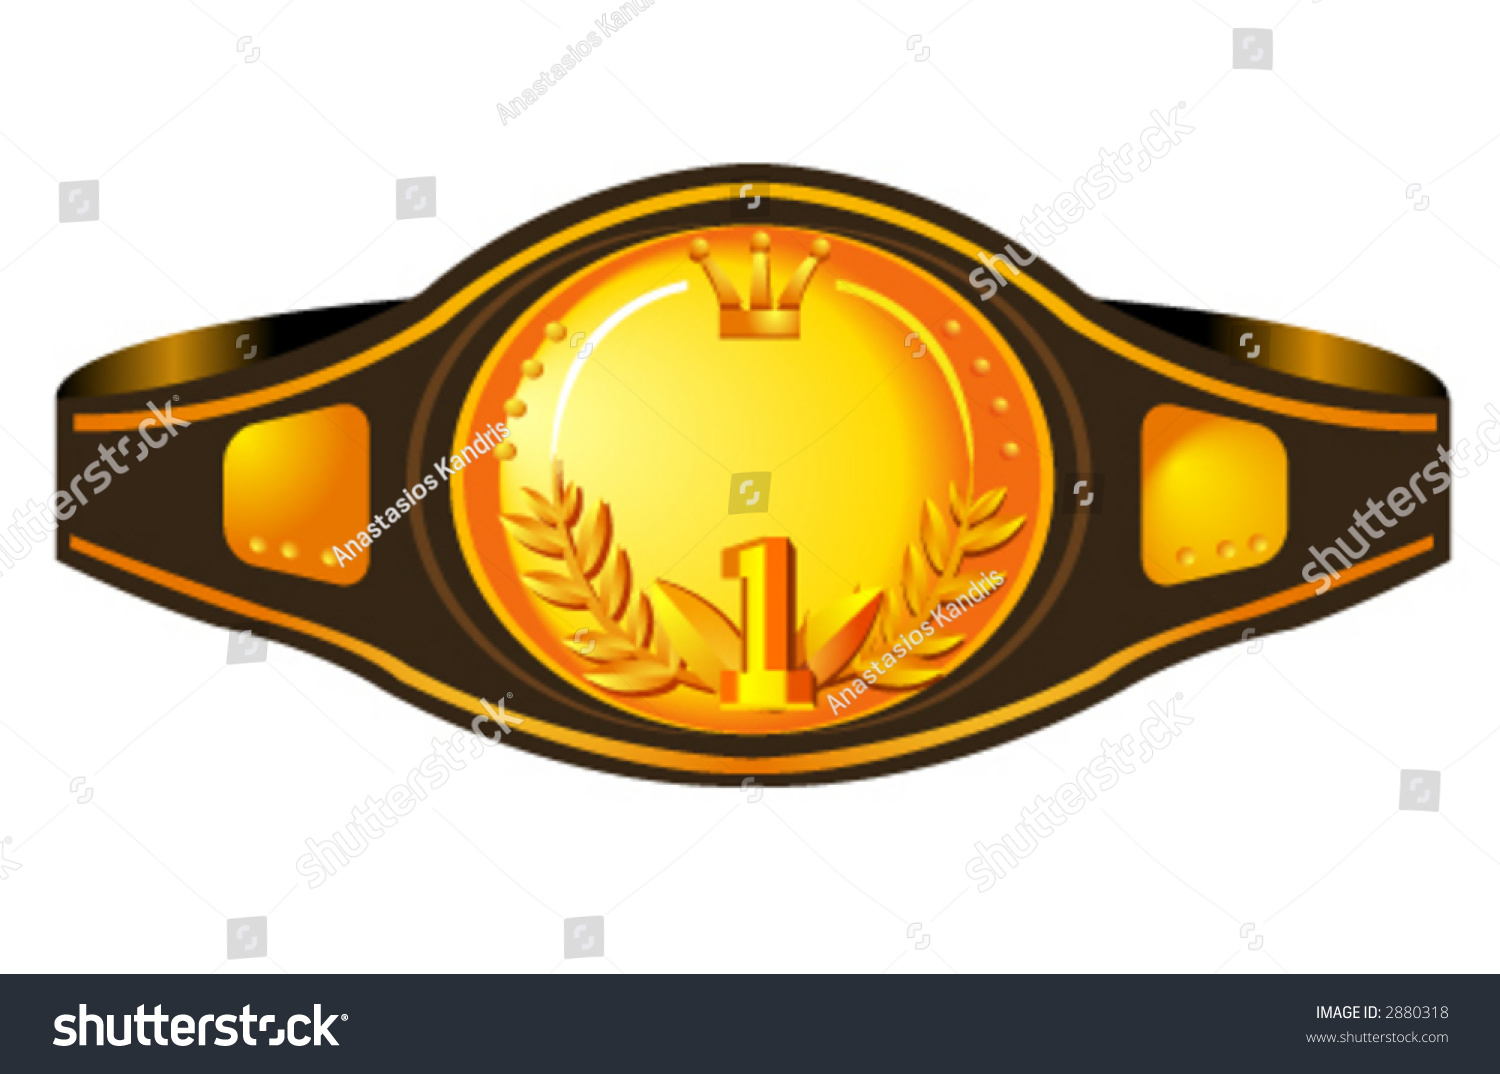 SVG of illustration of a box champion's belt. Useful for a lot of projects svg